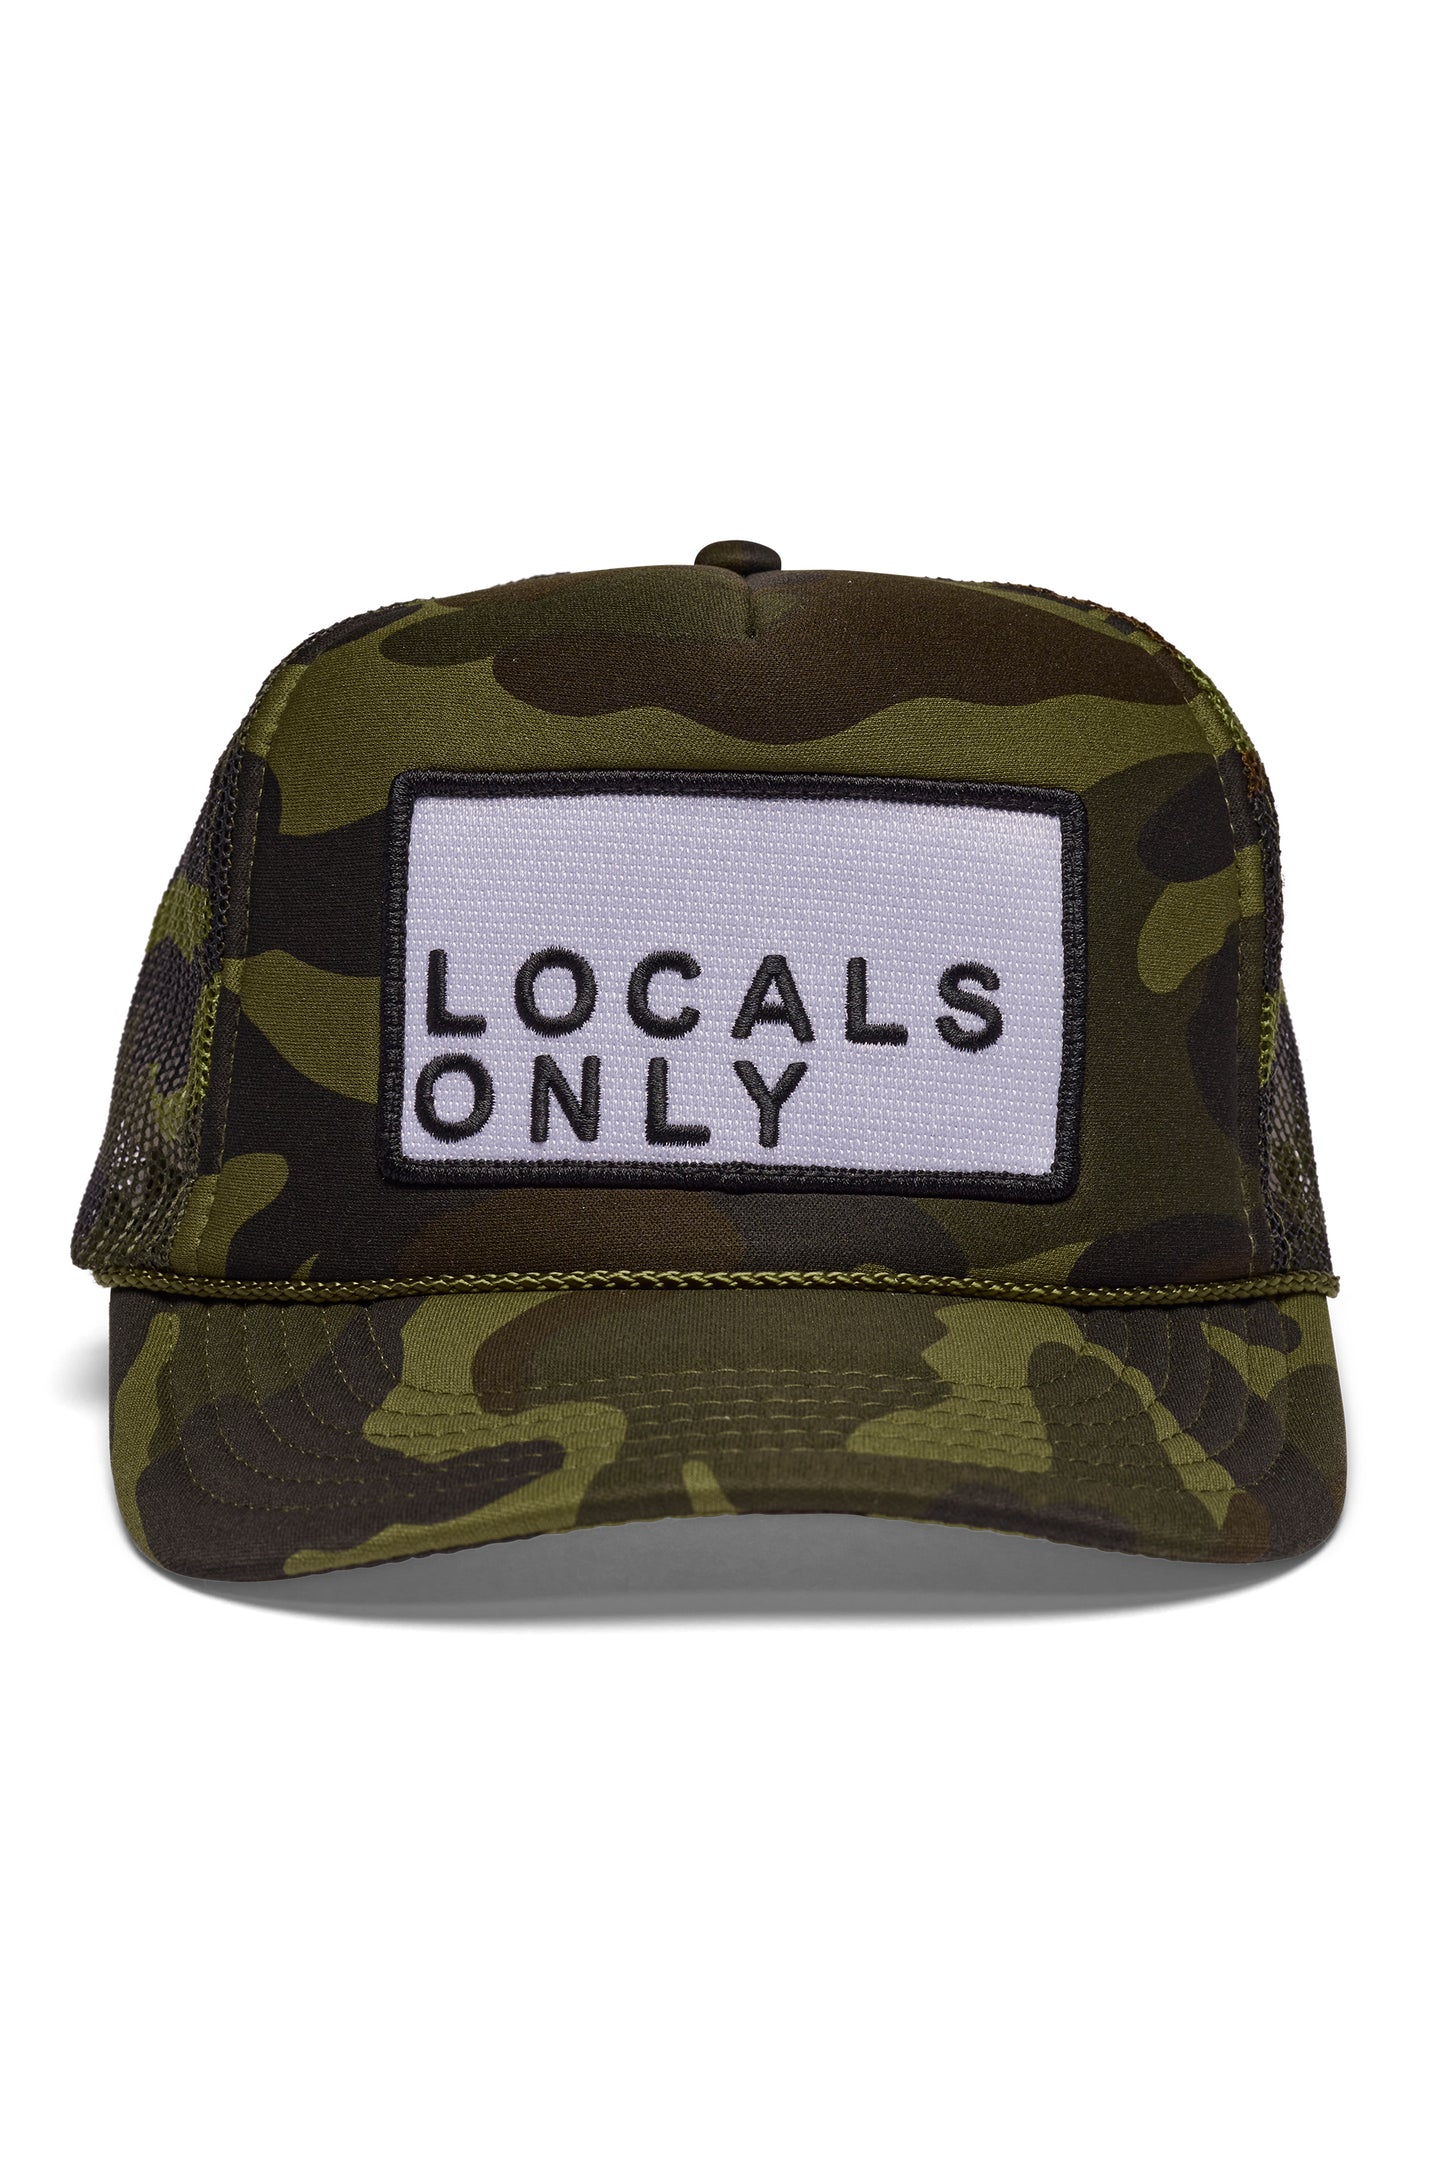 Locals Only Hat - Camo